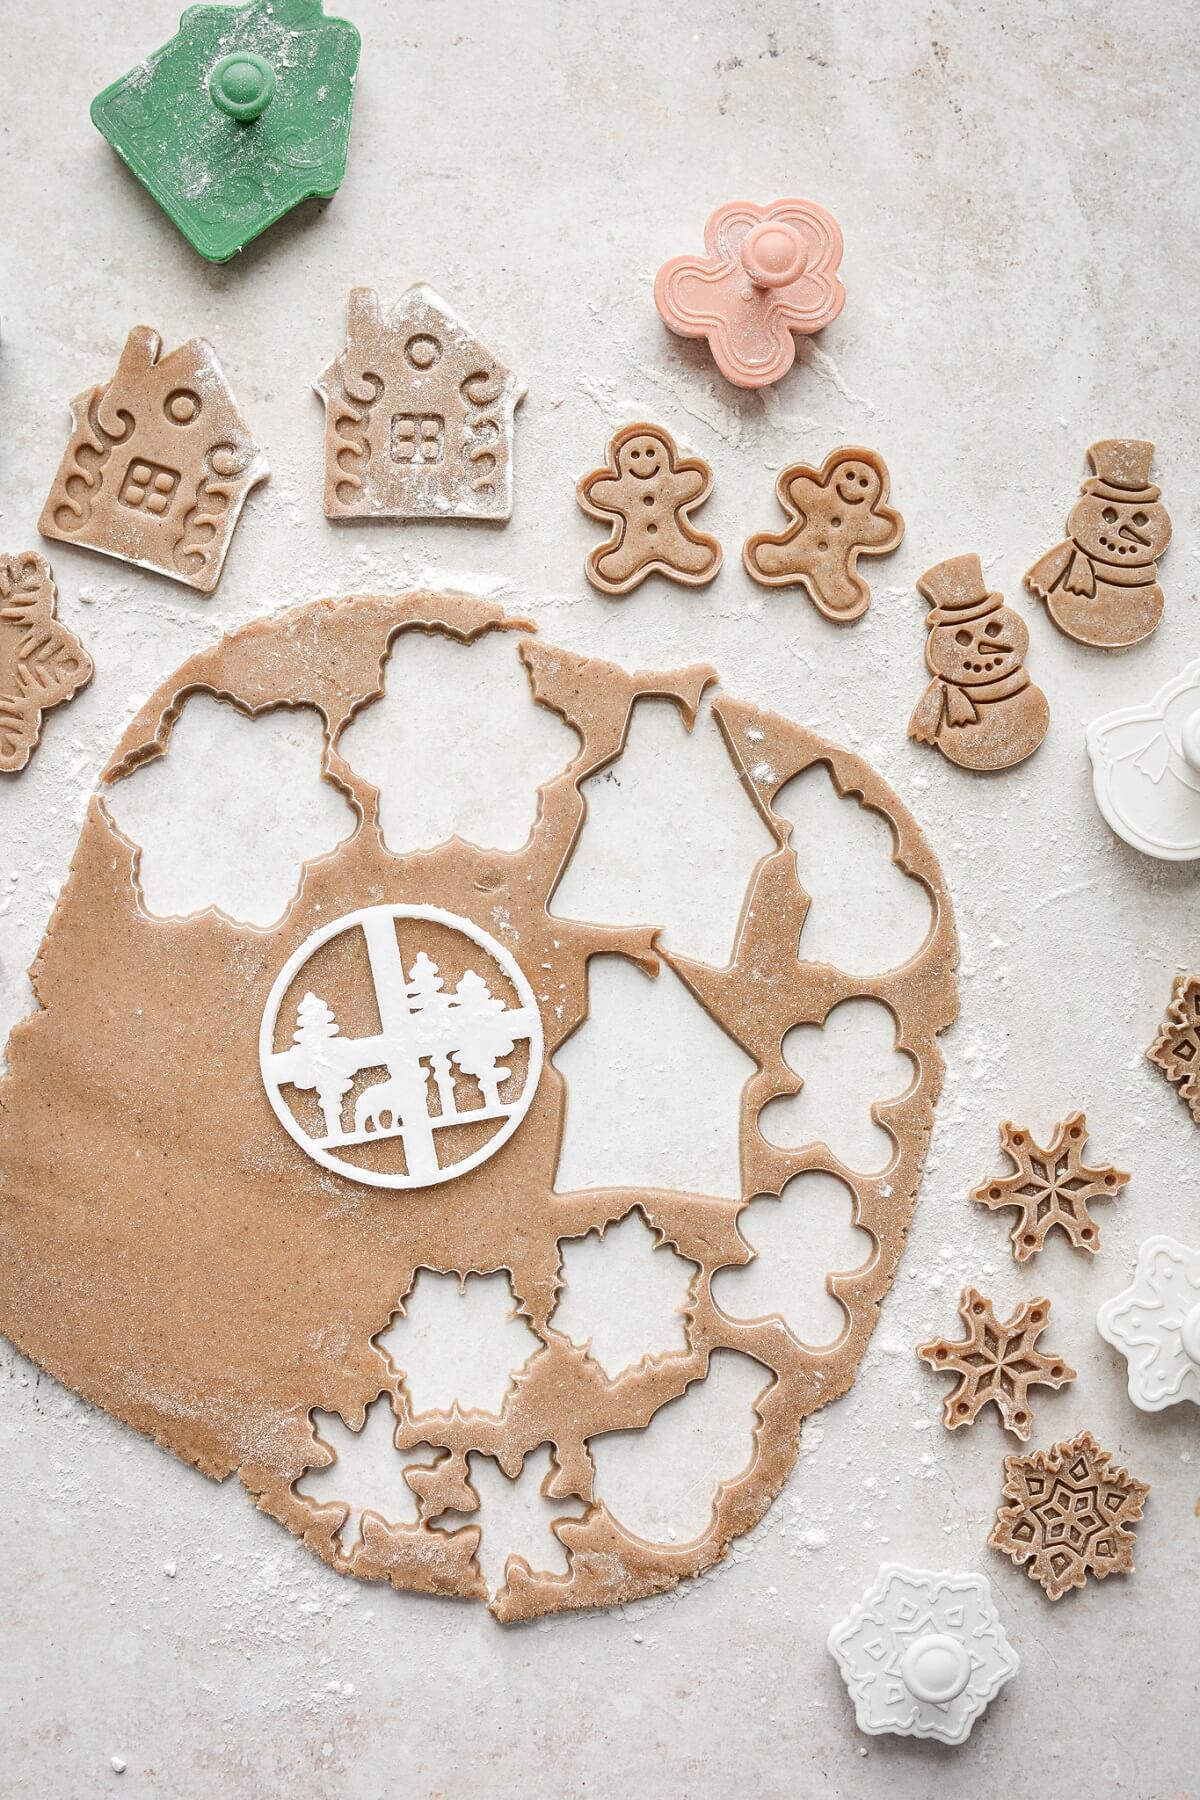 Gingerbread cookie dough cut with cookie cutters.